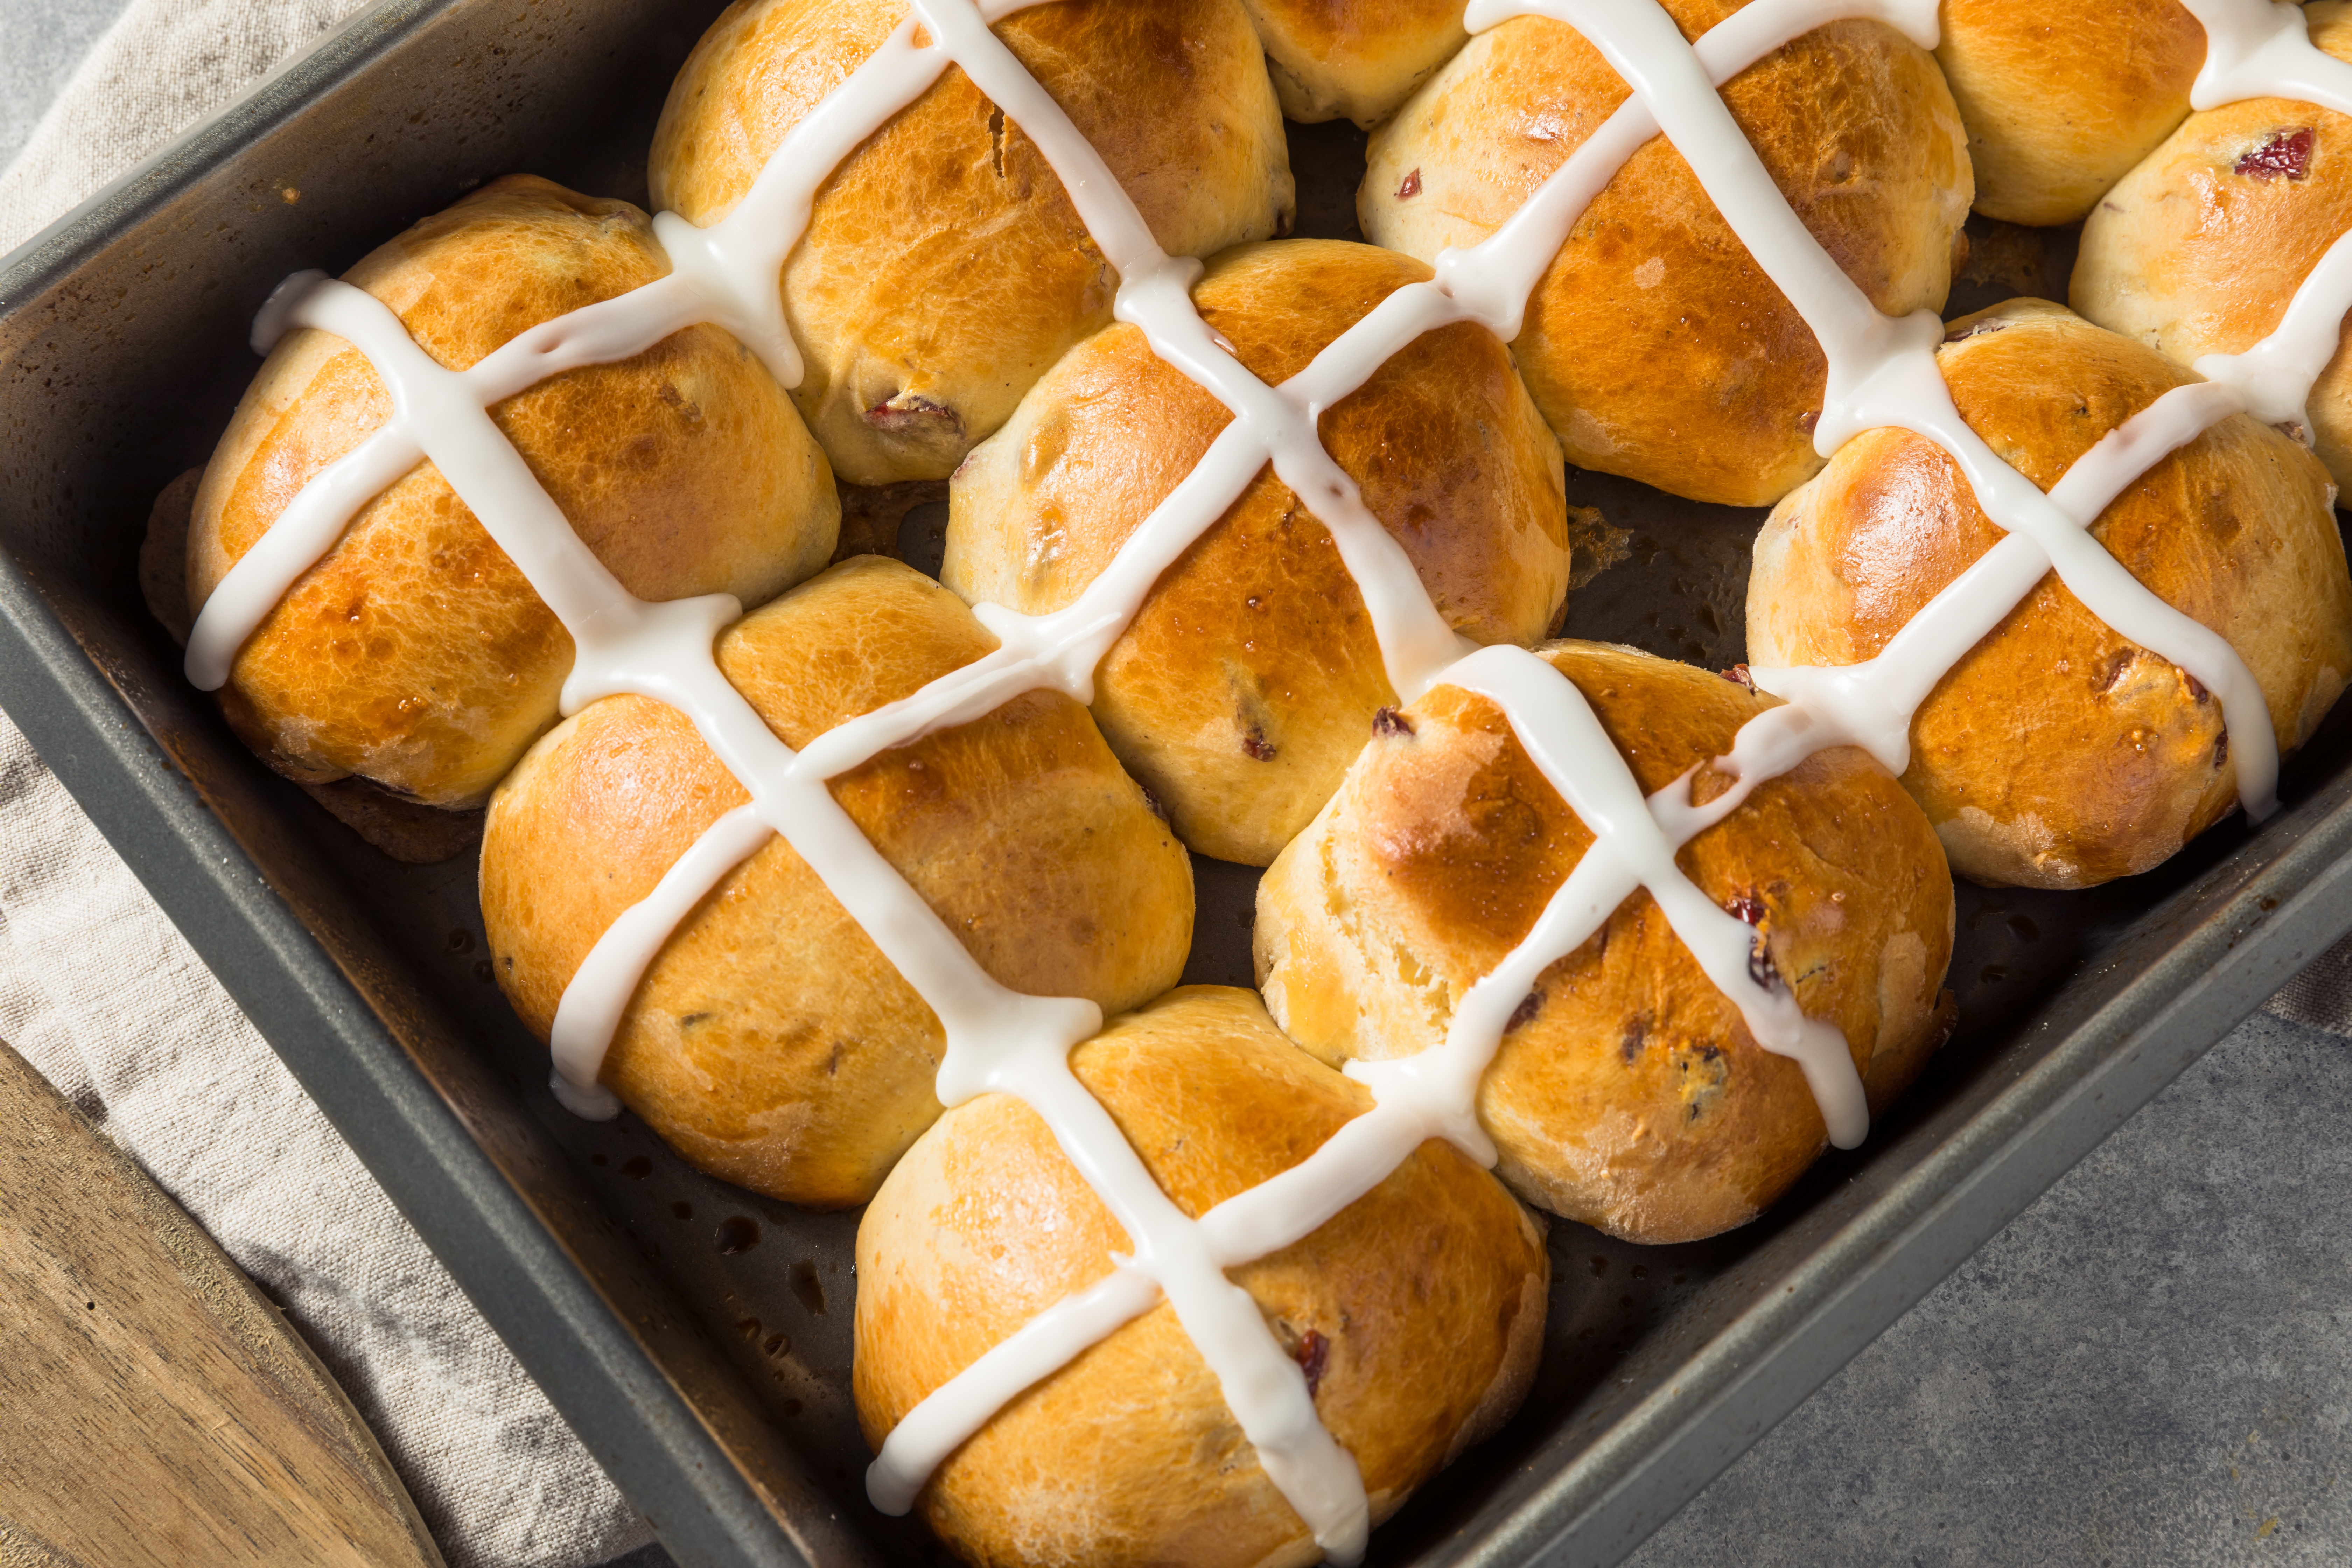 Pan of hot cross buns on the counter.